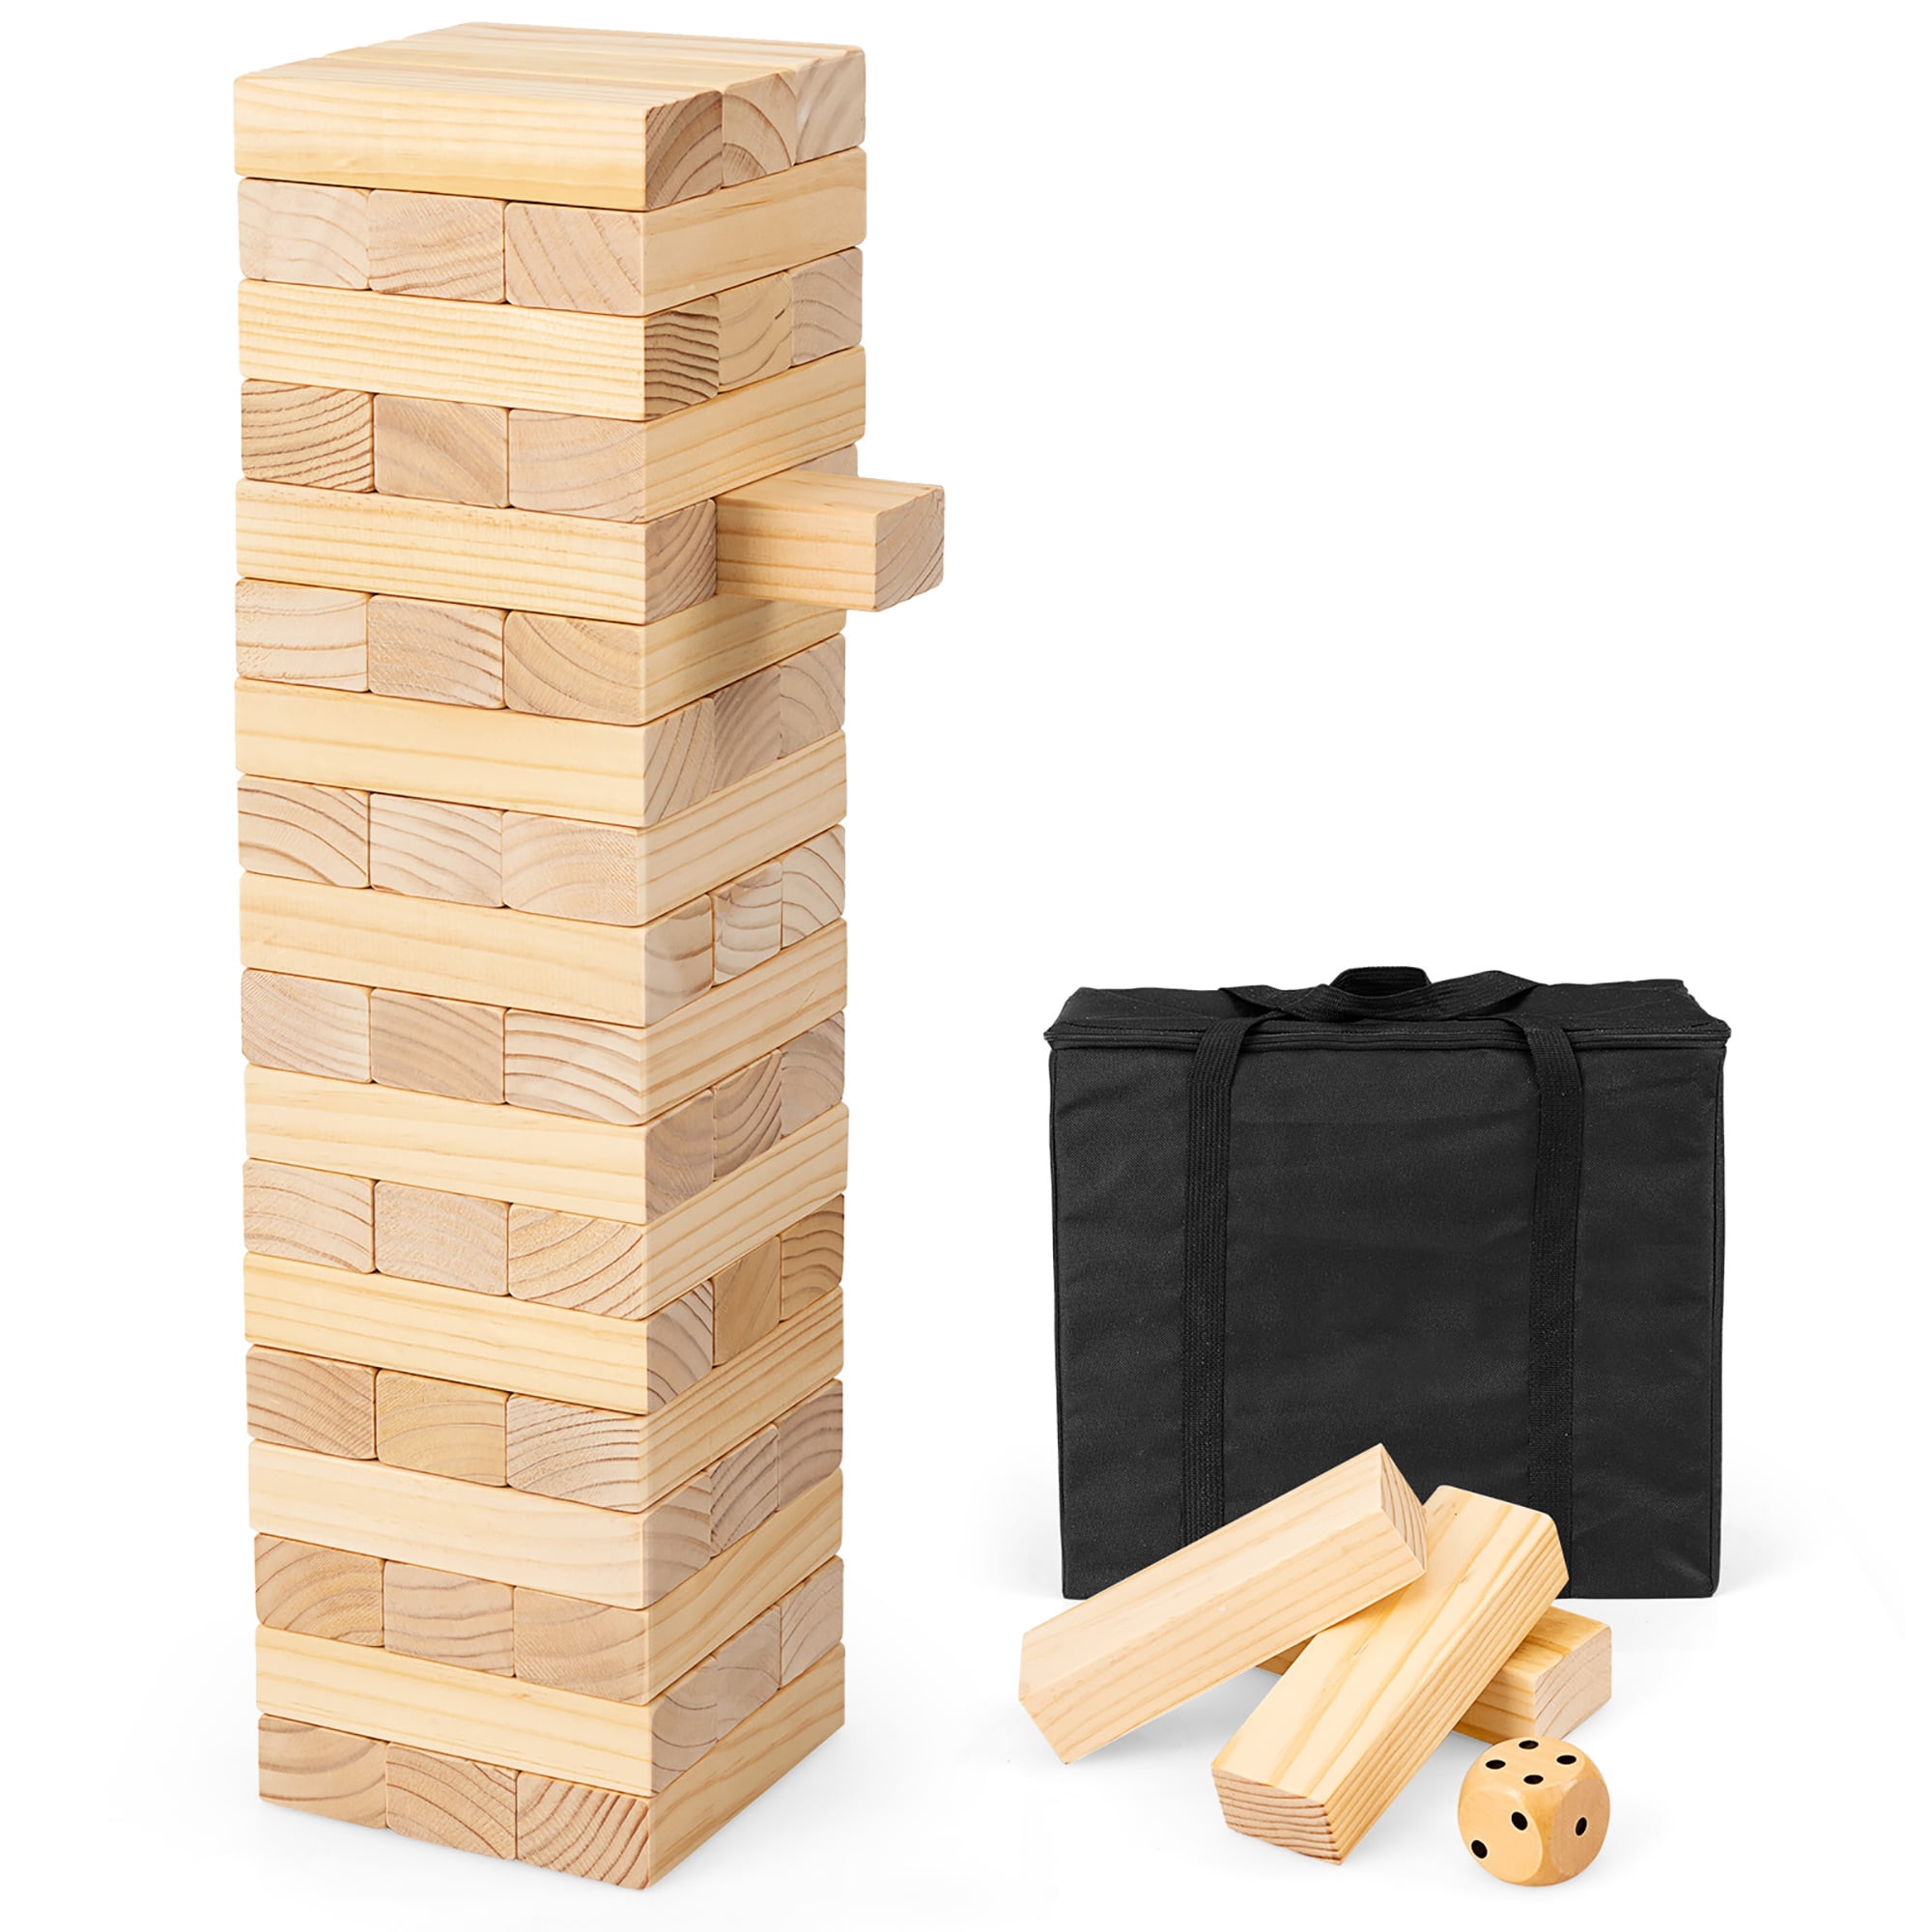 NEW CARDS DICE DOMINOES STICKS GAME SET IN WOODEN TRAVEL CARRY BOX CASE LEGLER 